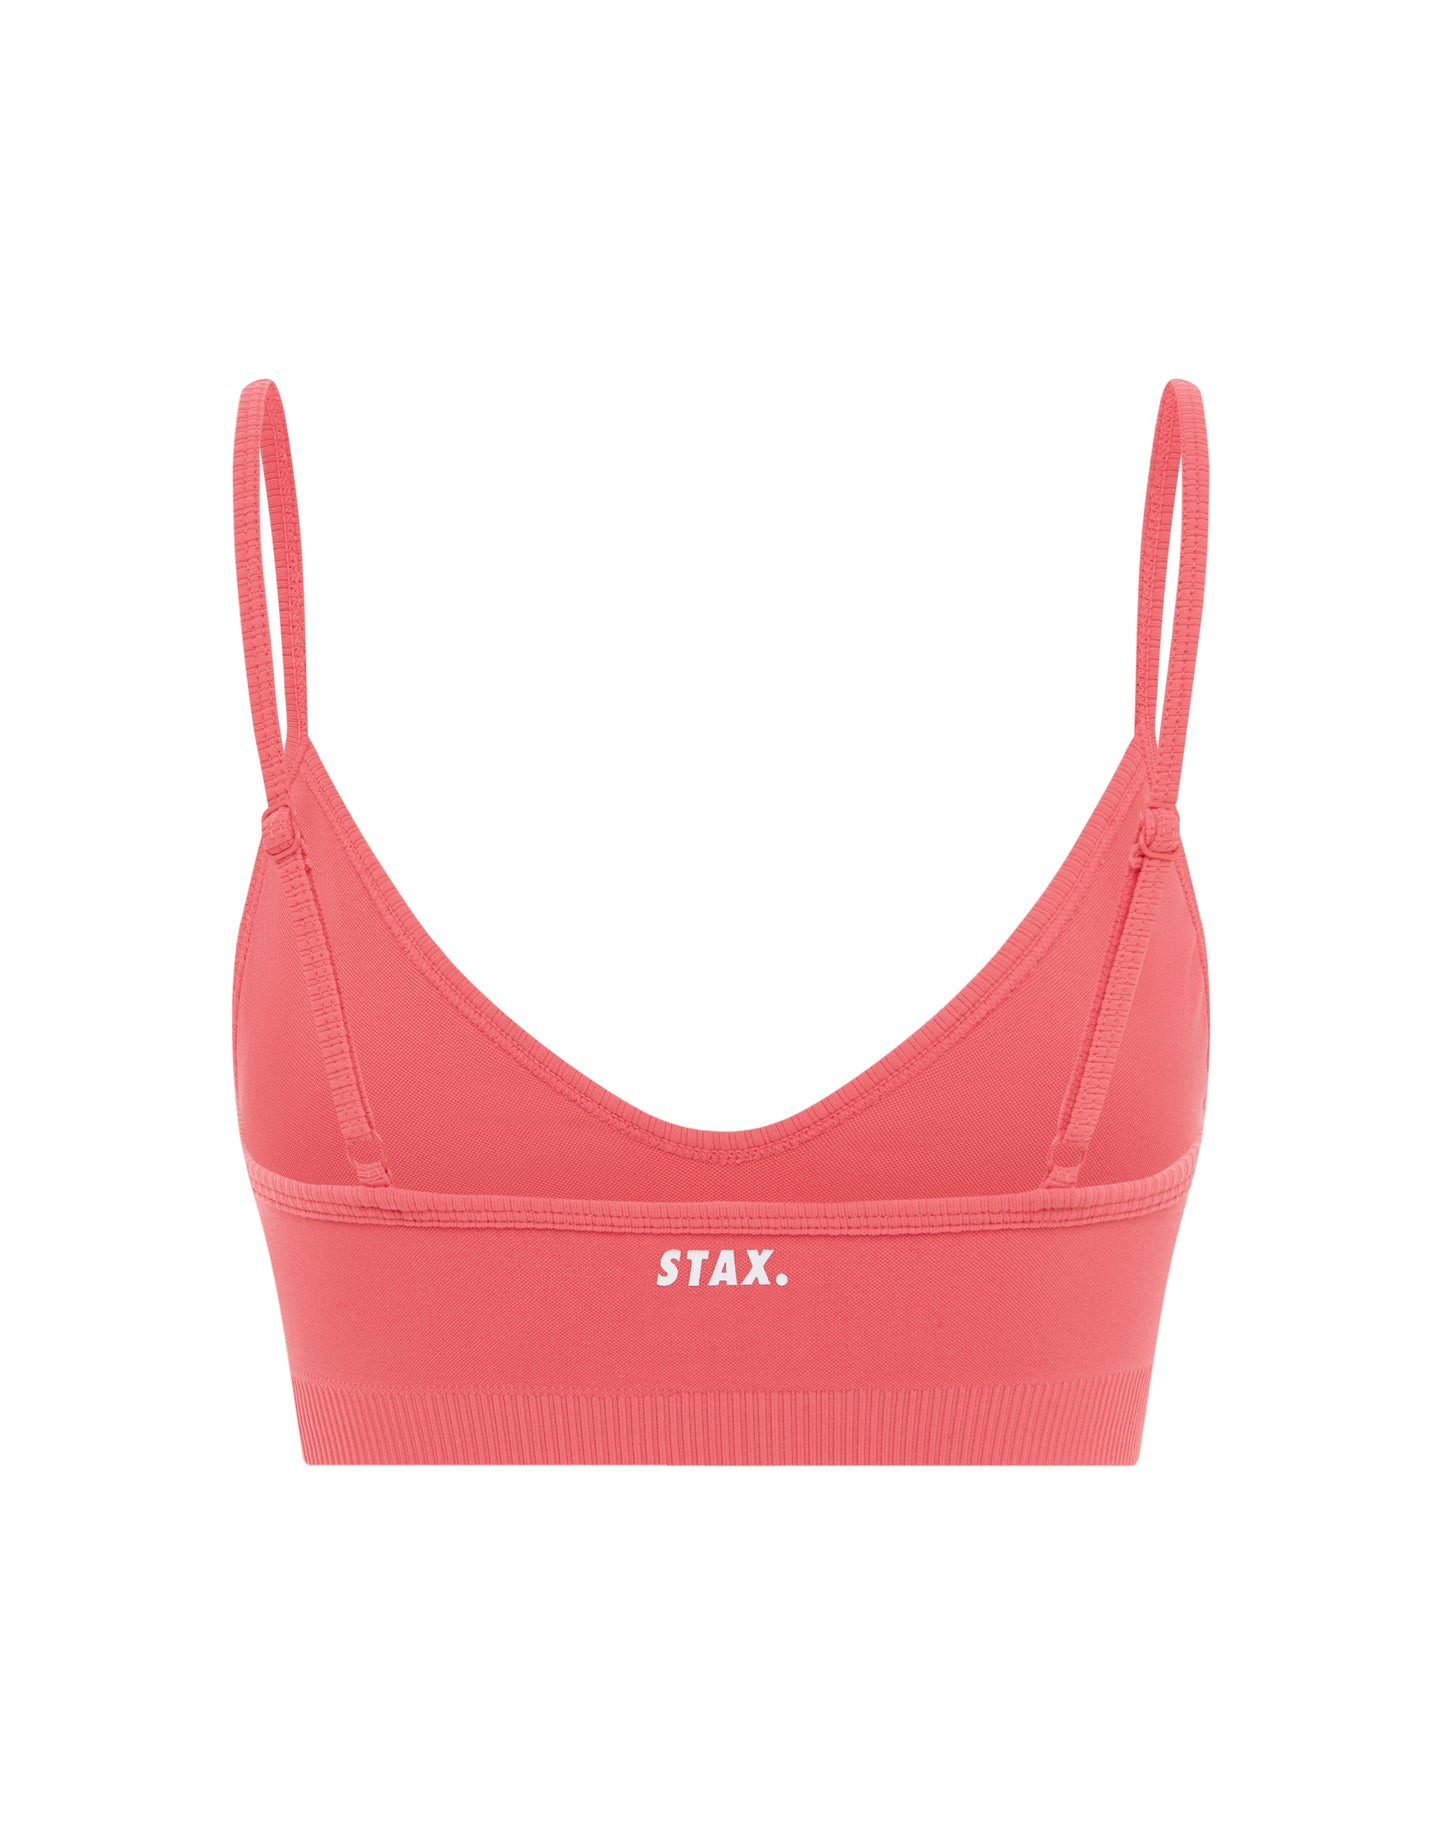 STAX. PS Bralette - Pink